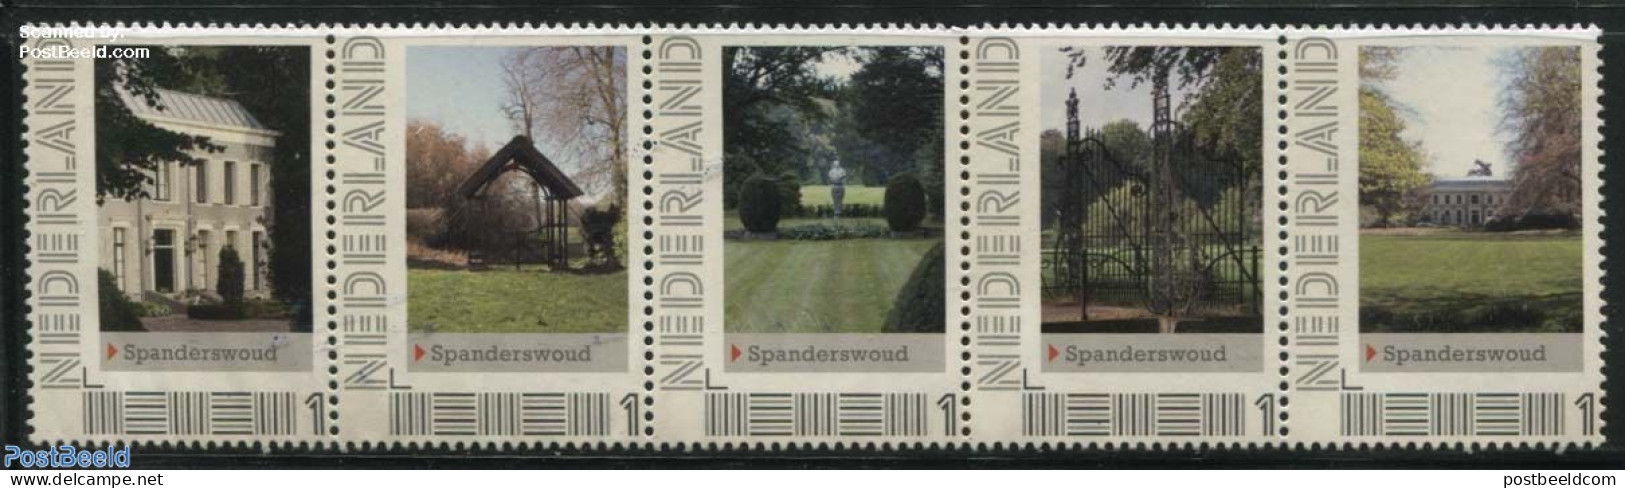 Netherlands - Personal Stamps TNT/PNL 2012 Spanderswoud 5V [::::], Mint NH, Nature - Trees & Forests - Castles & Forti.. - Rotary, Lions Club